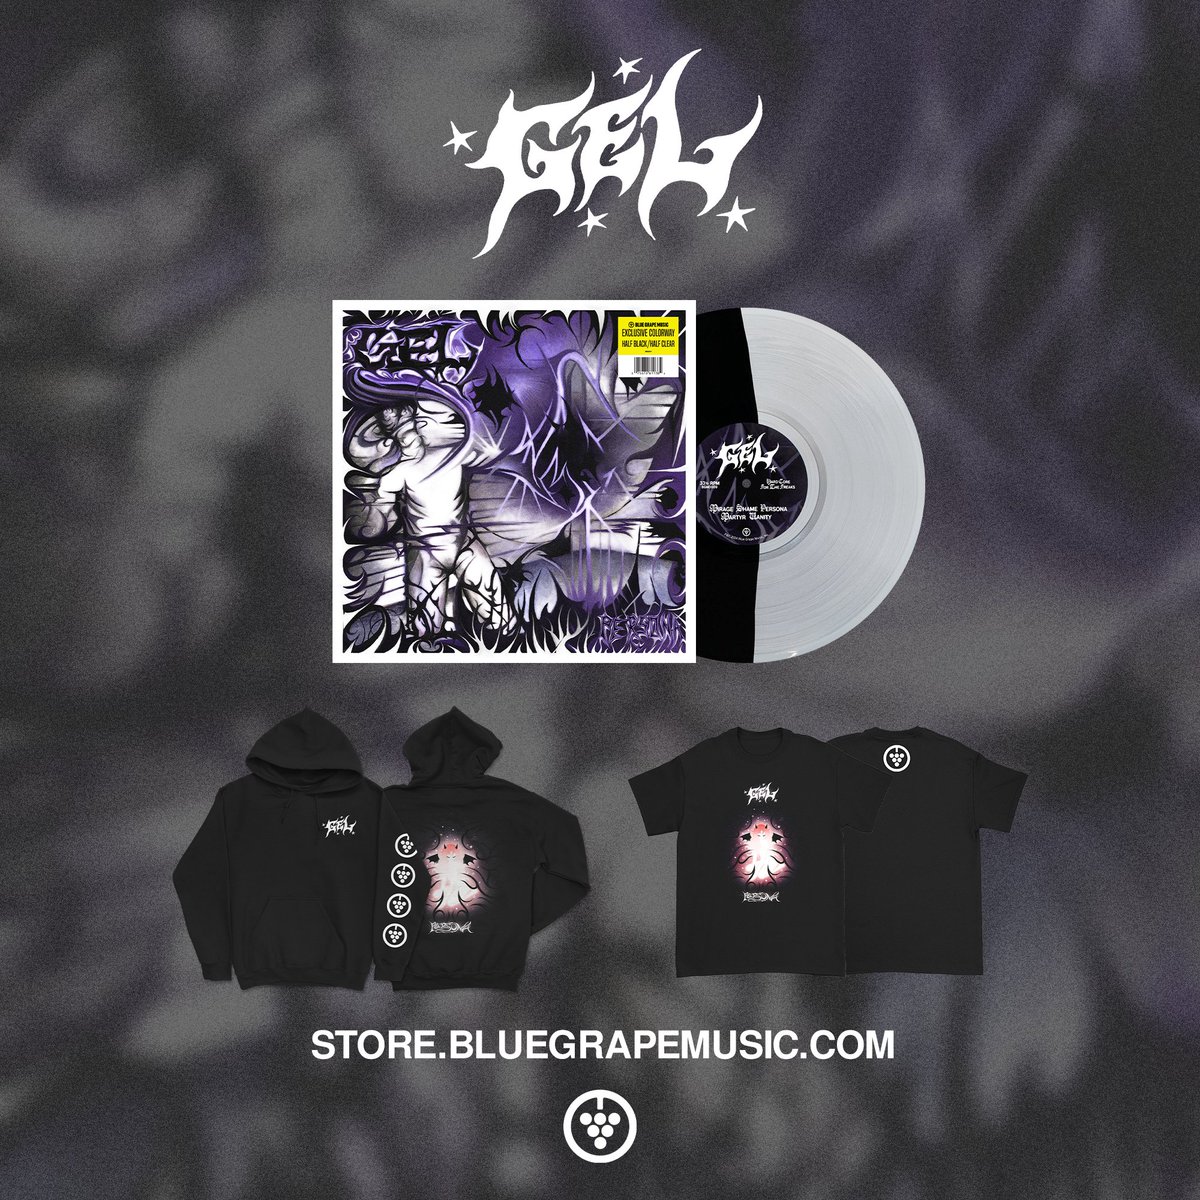 Limited exclusive @GELhc Persona EP vinyl and merch is up on our store now. These are moving fast - store.bluegrapemusic.com